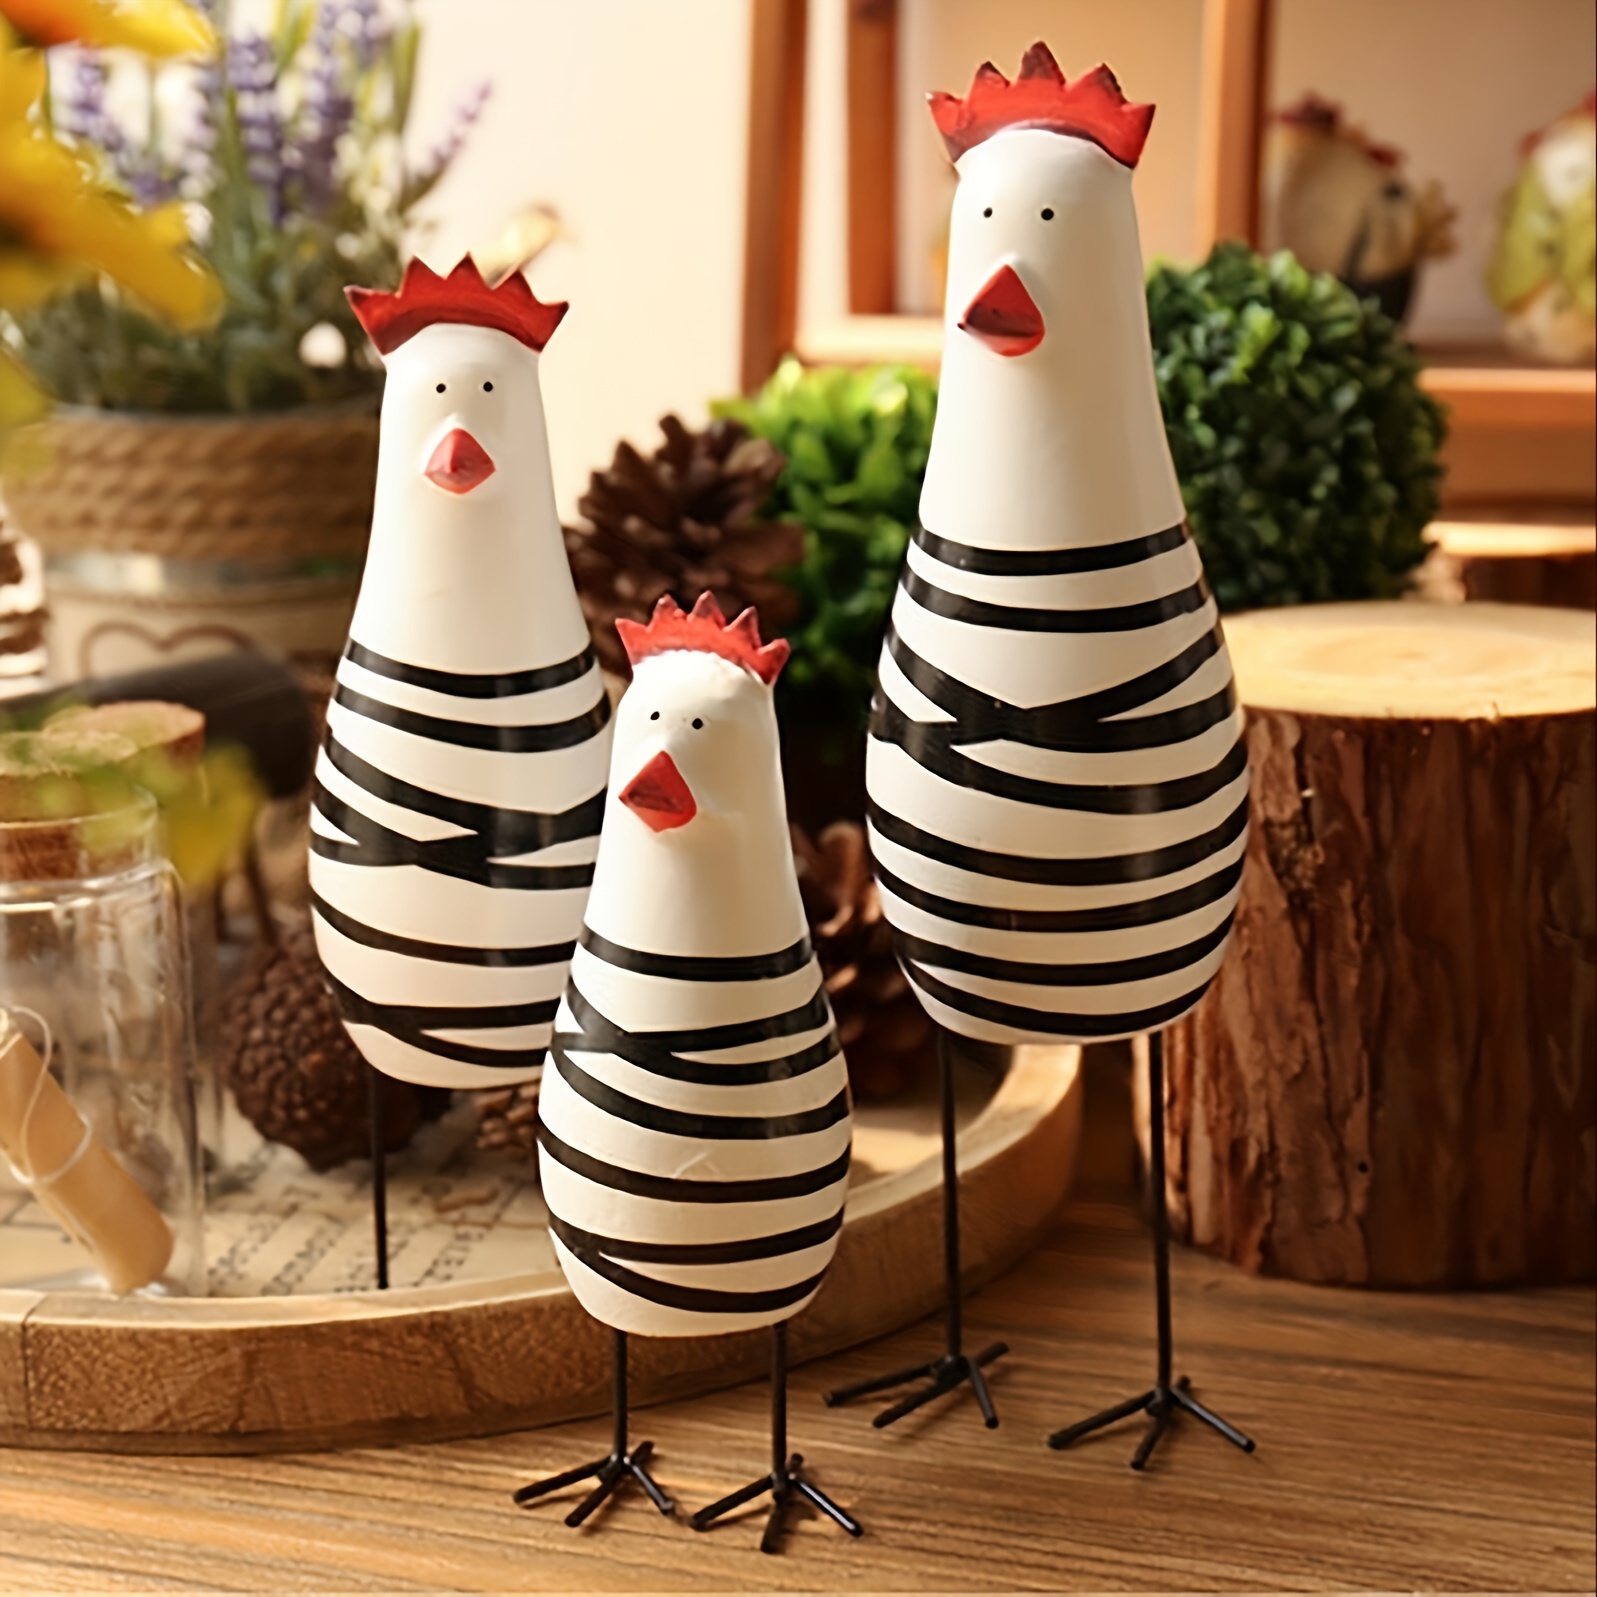 

3pcs/set European Style Hand-painted Wooden Chickens Family Figurines, Rustic Animal Ornaments, Home Desktop Decor, Wood Craft Home Decor, Mother's Day Gifts